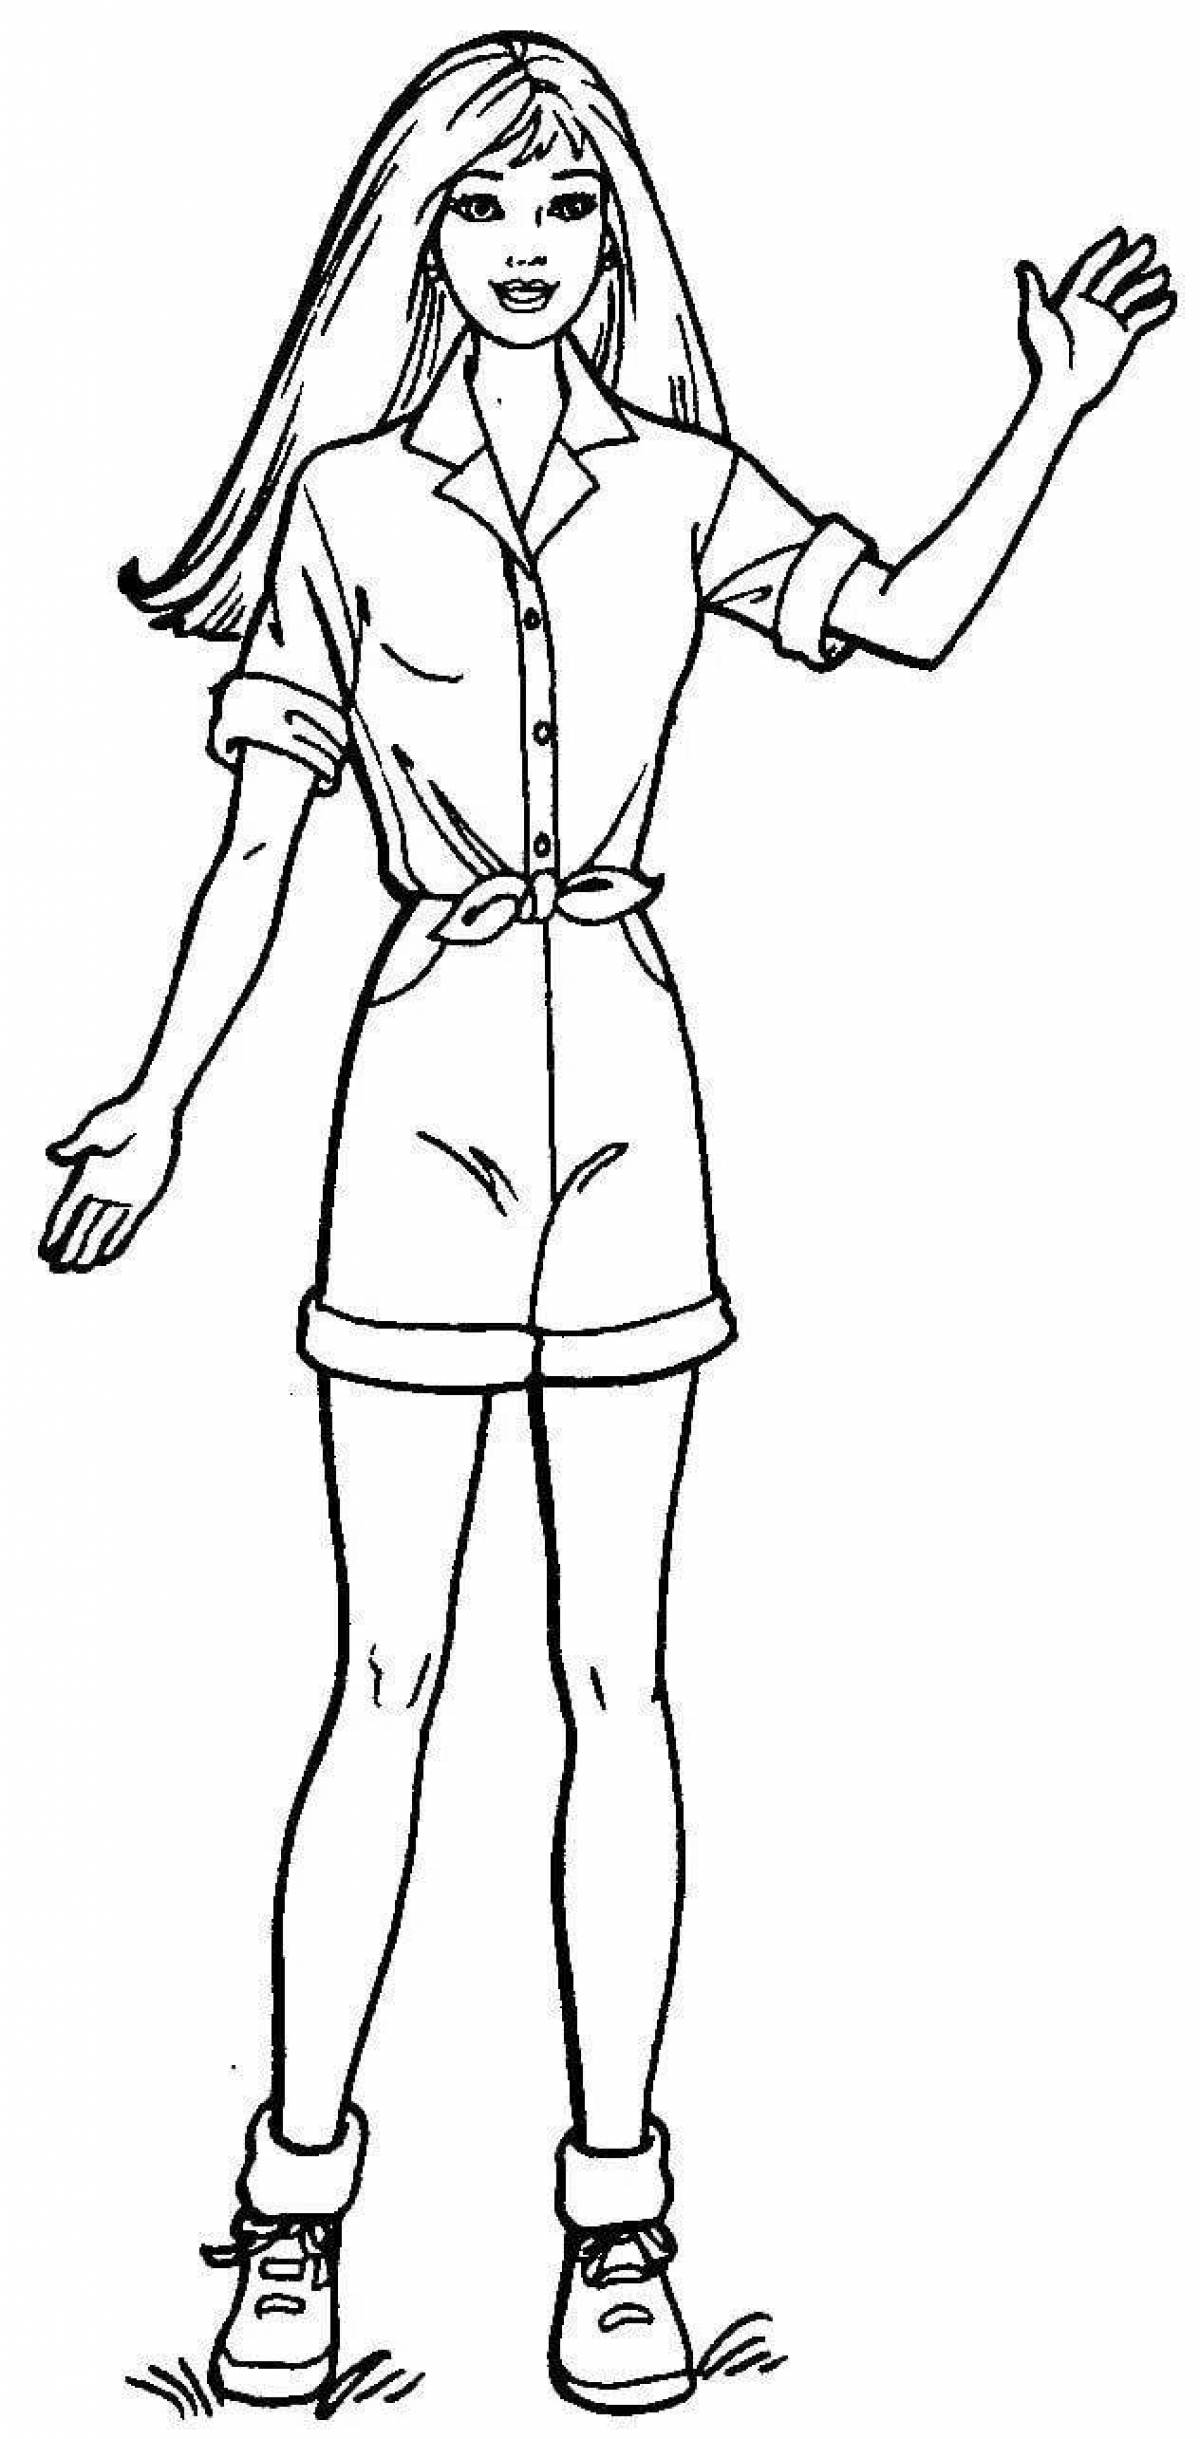 Nice man and girl coloring pages